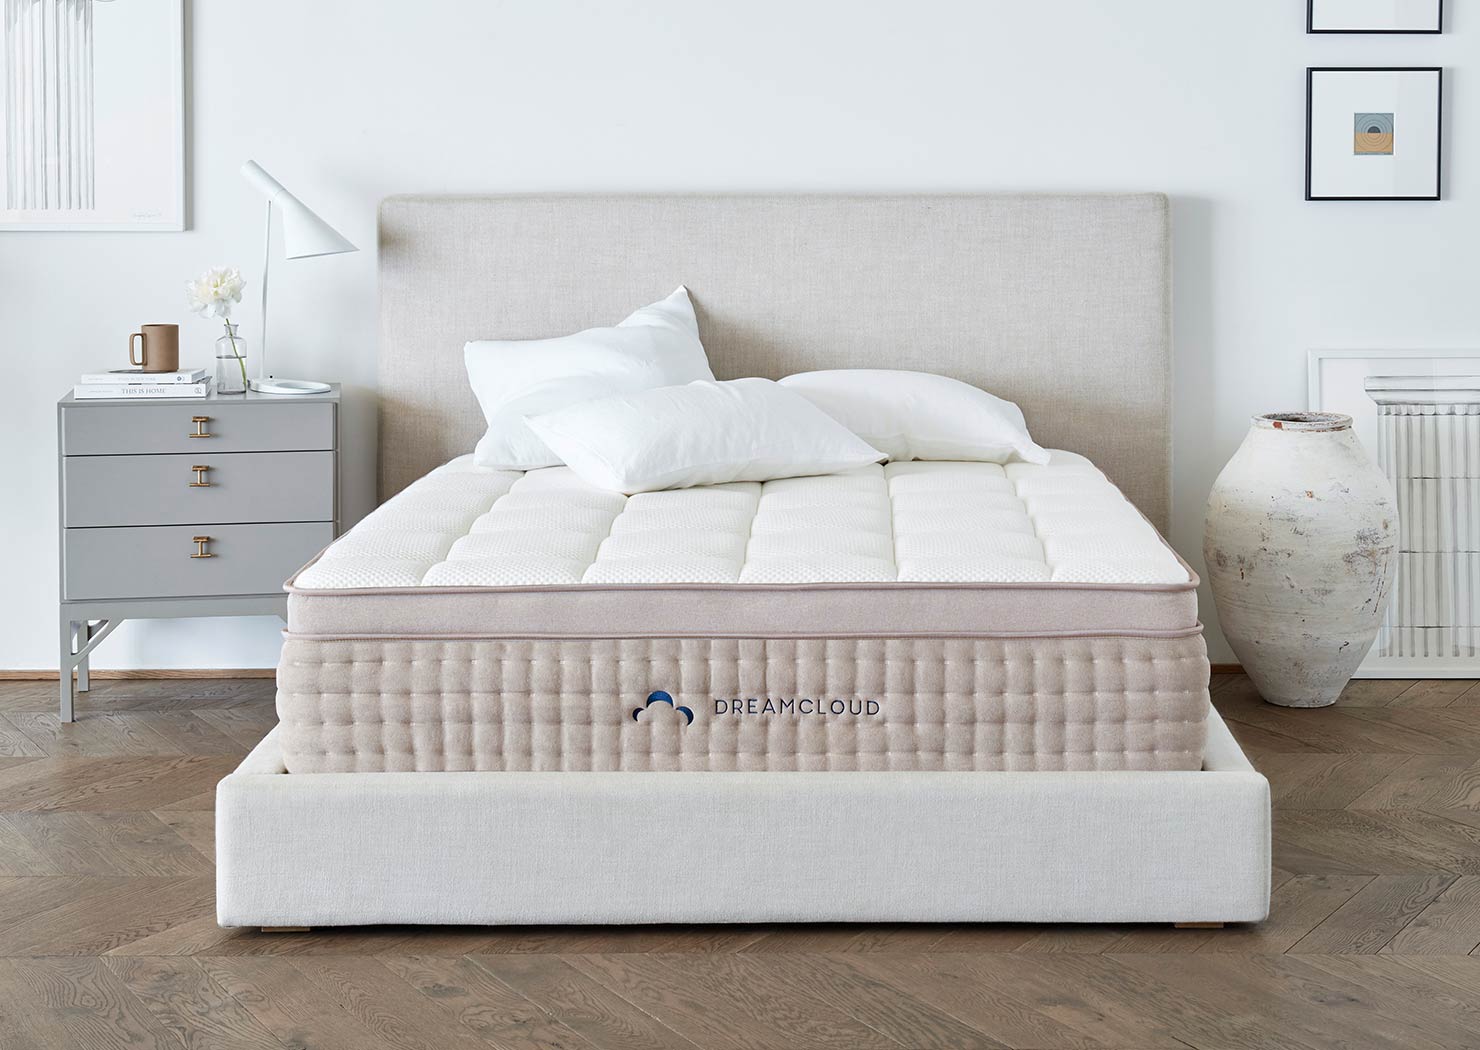 Best Mattresses for Platform Beds — Ultimate Guide and Reviews